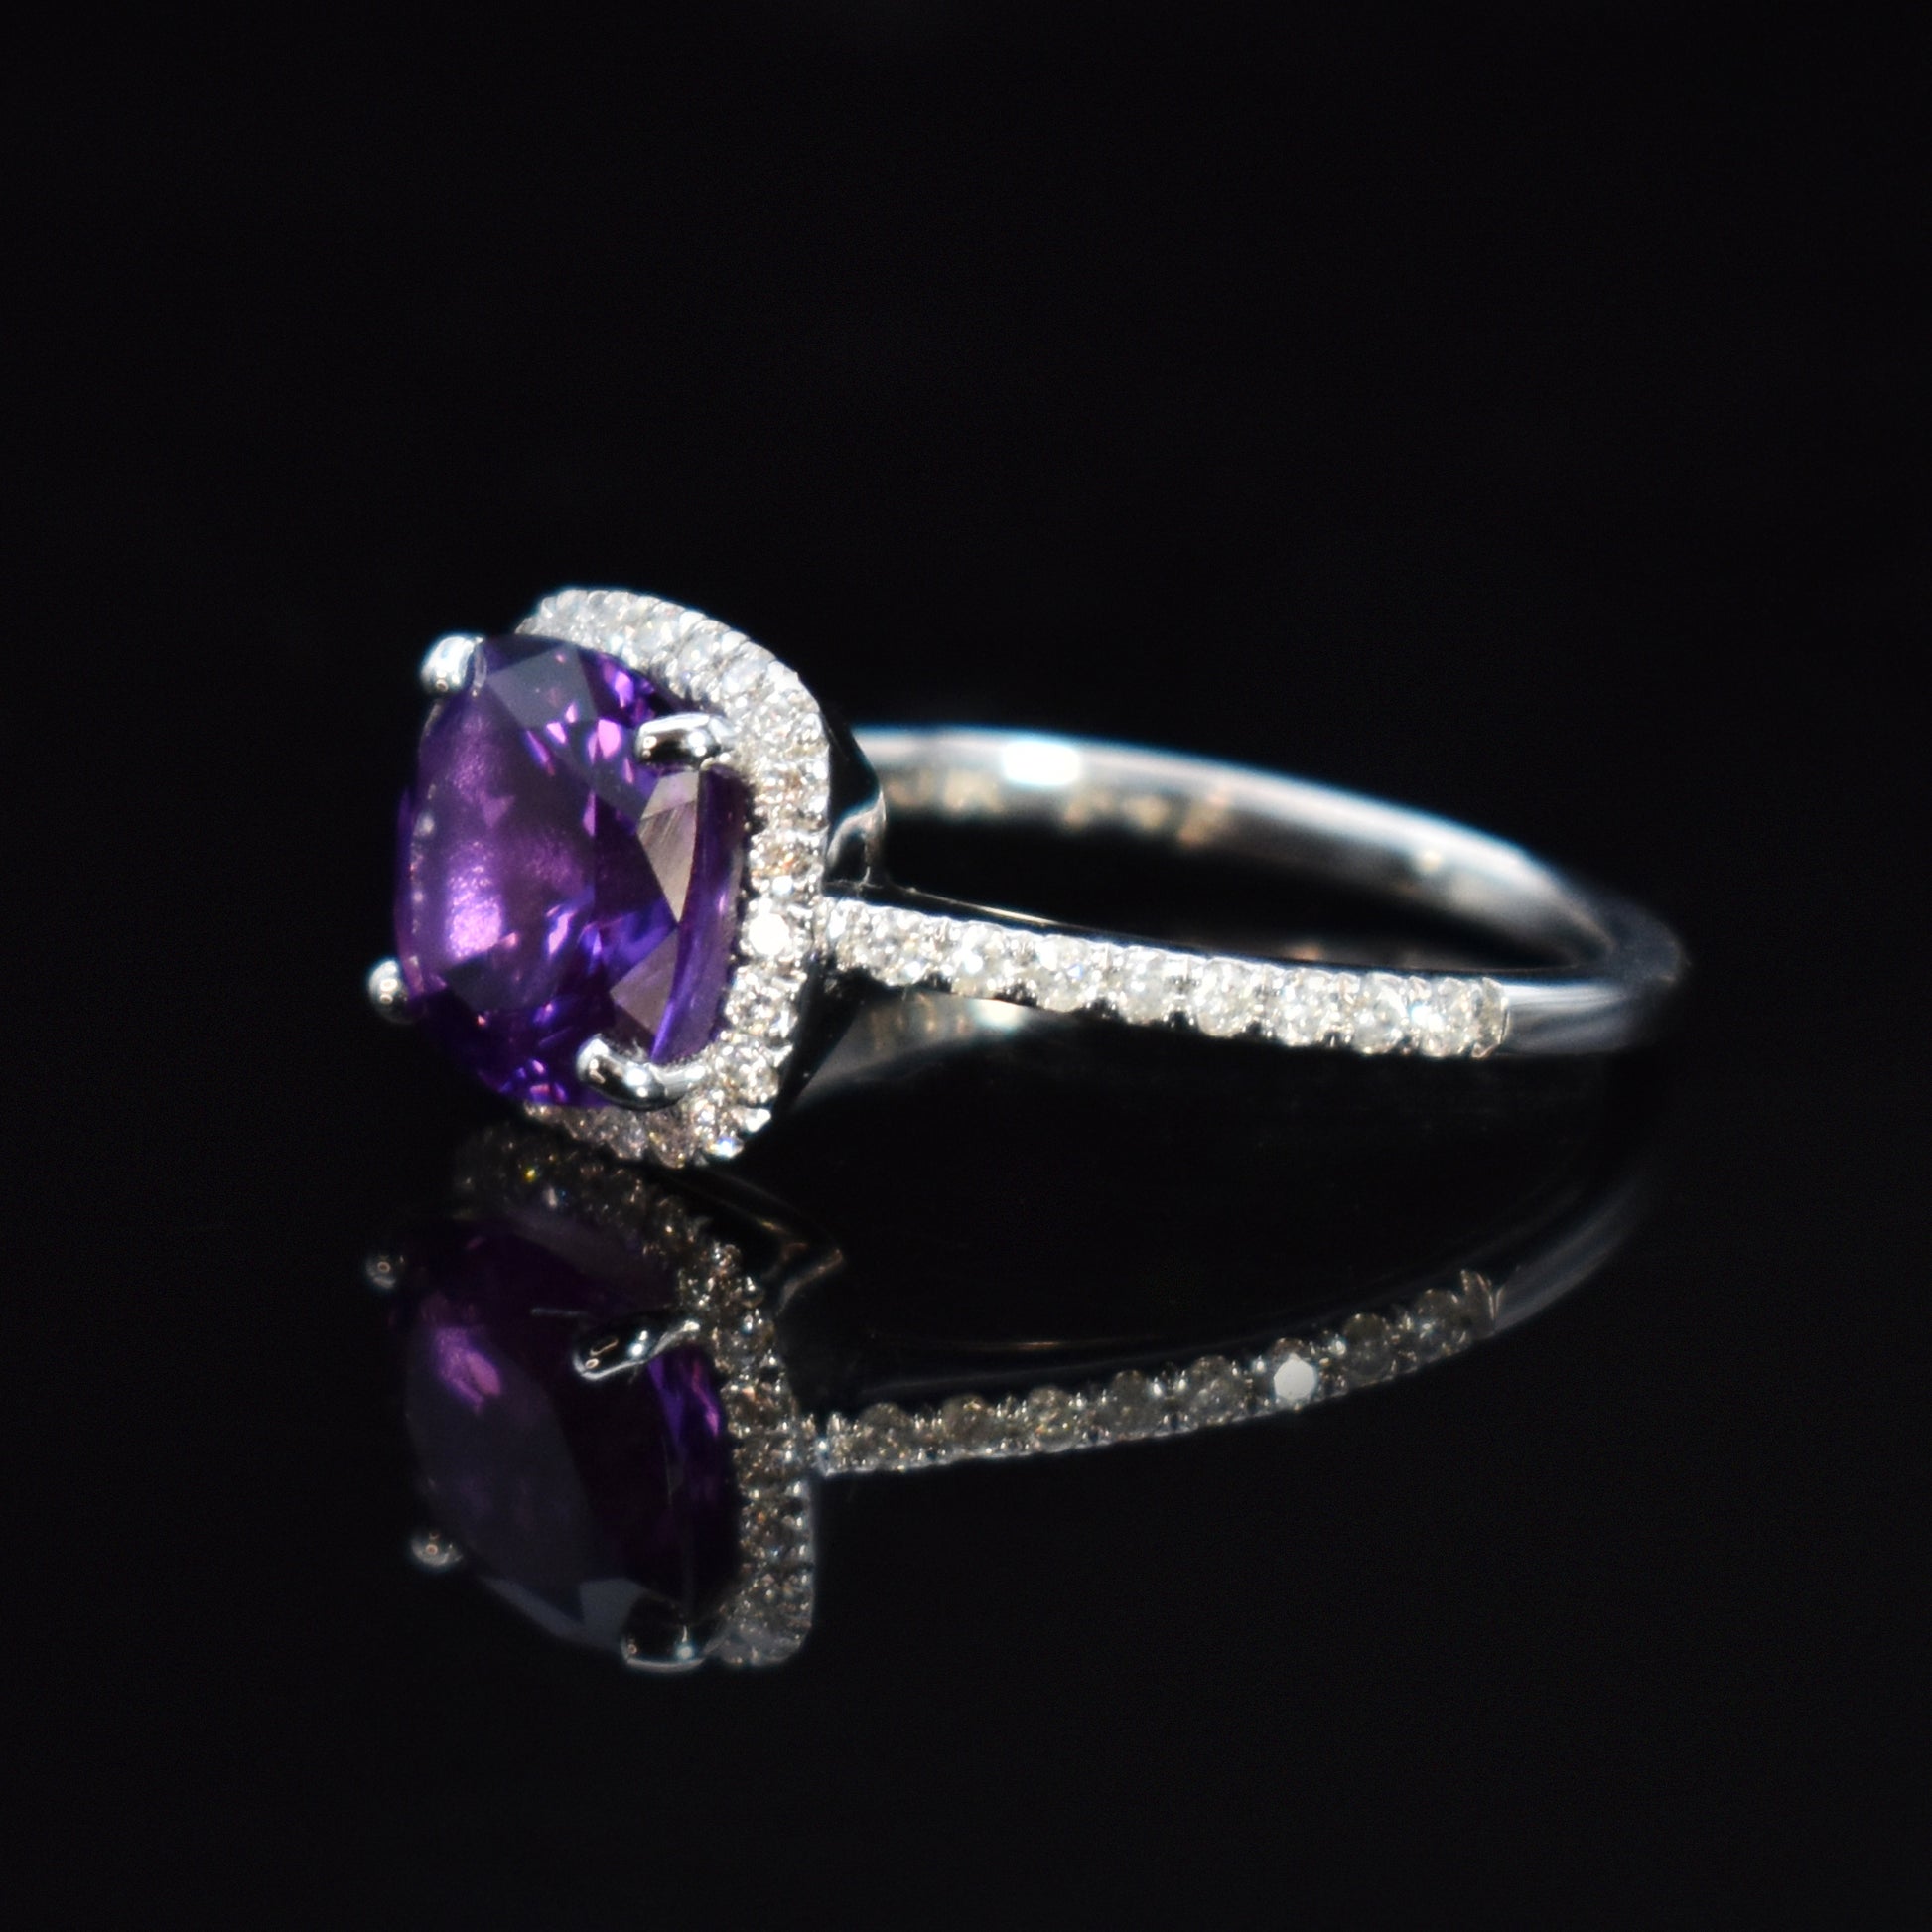 Ashes ring with amethyst and diamond